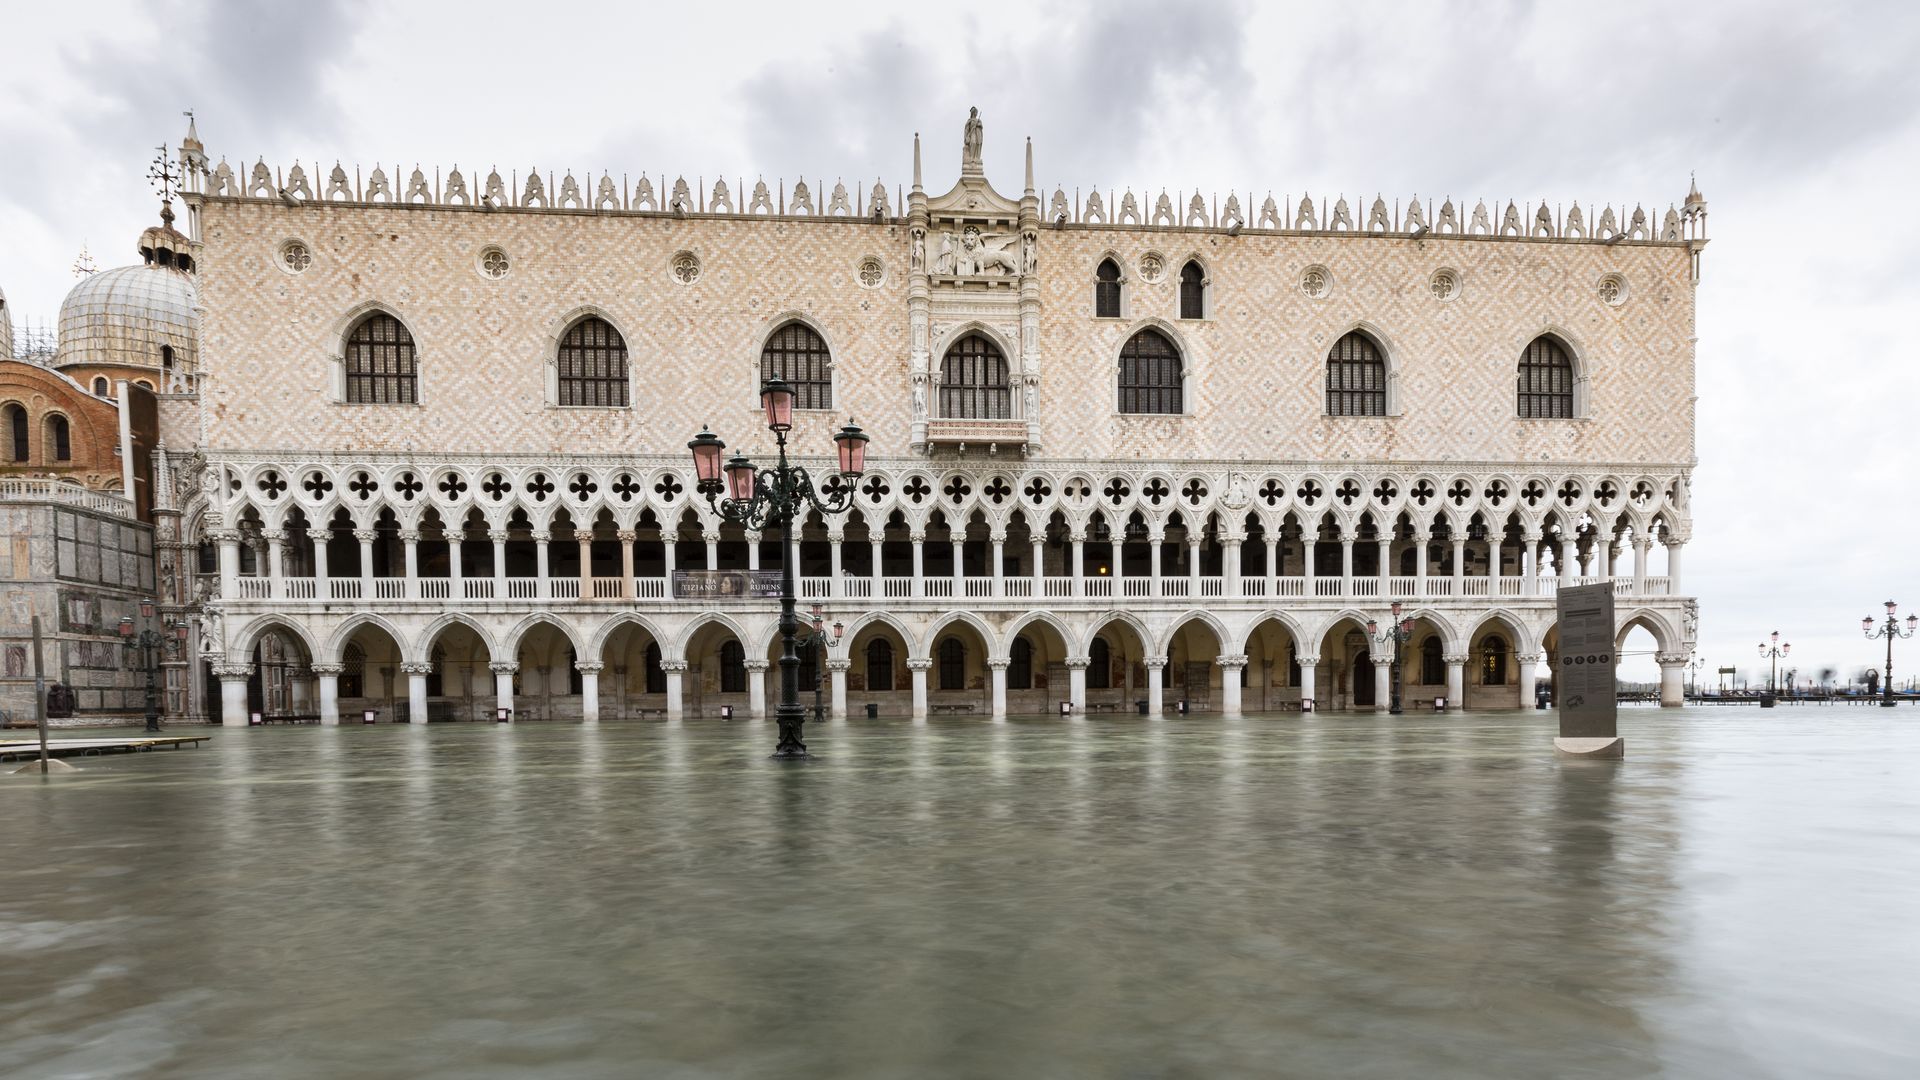 The Doge's Palace in Venice